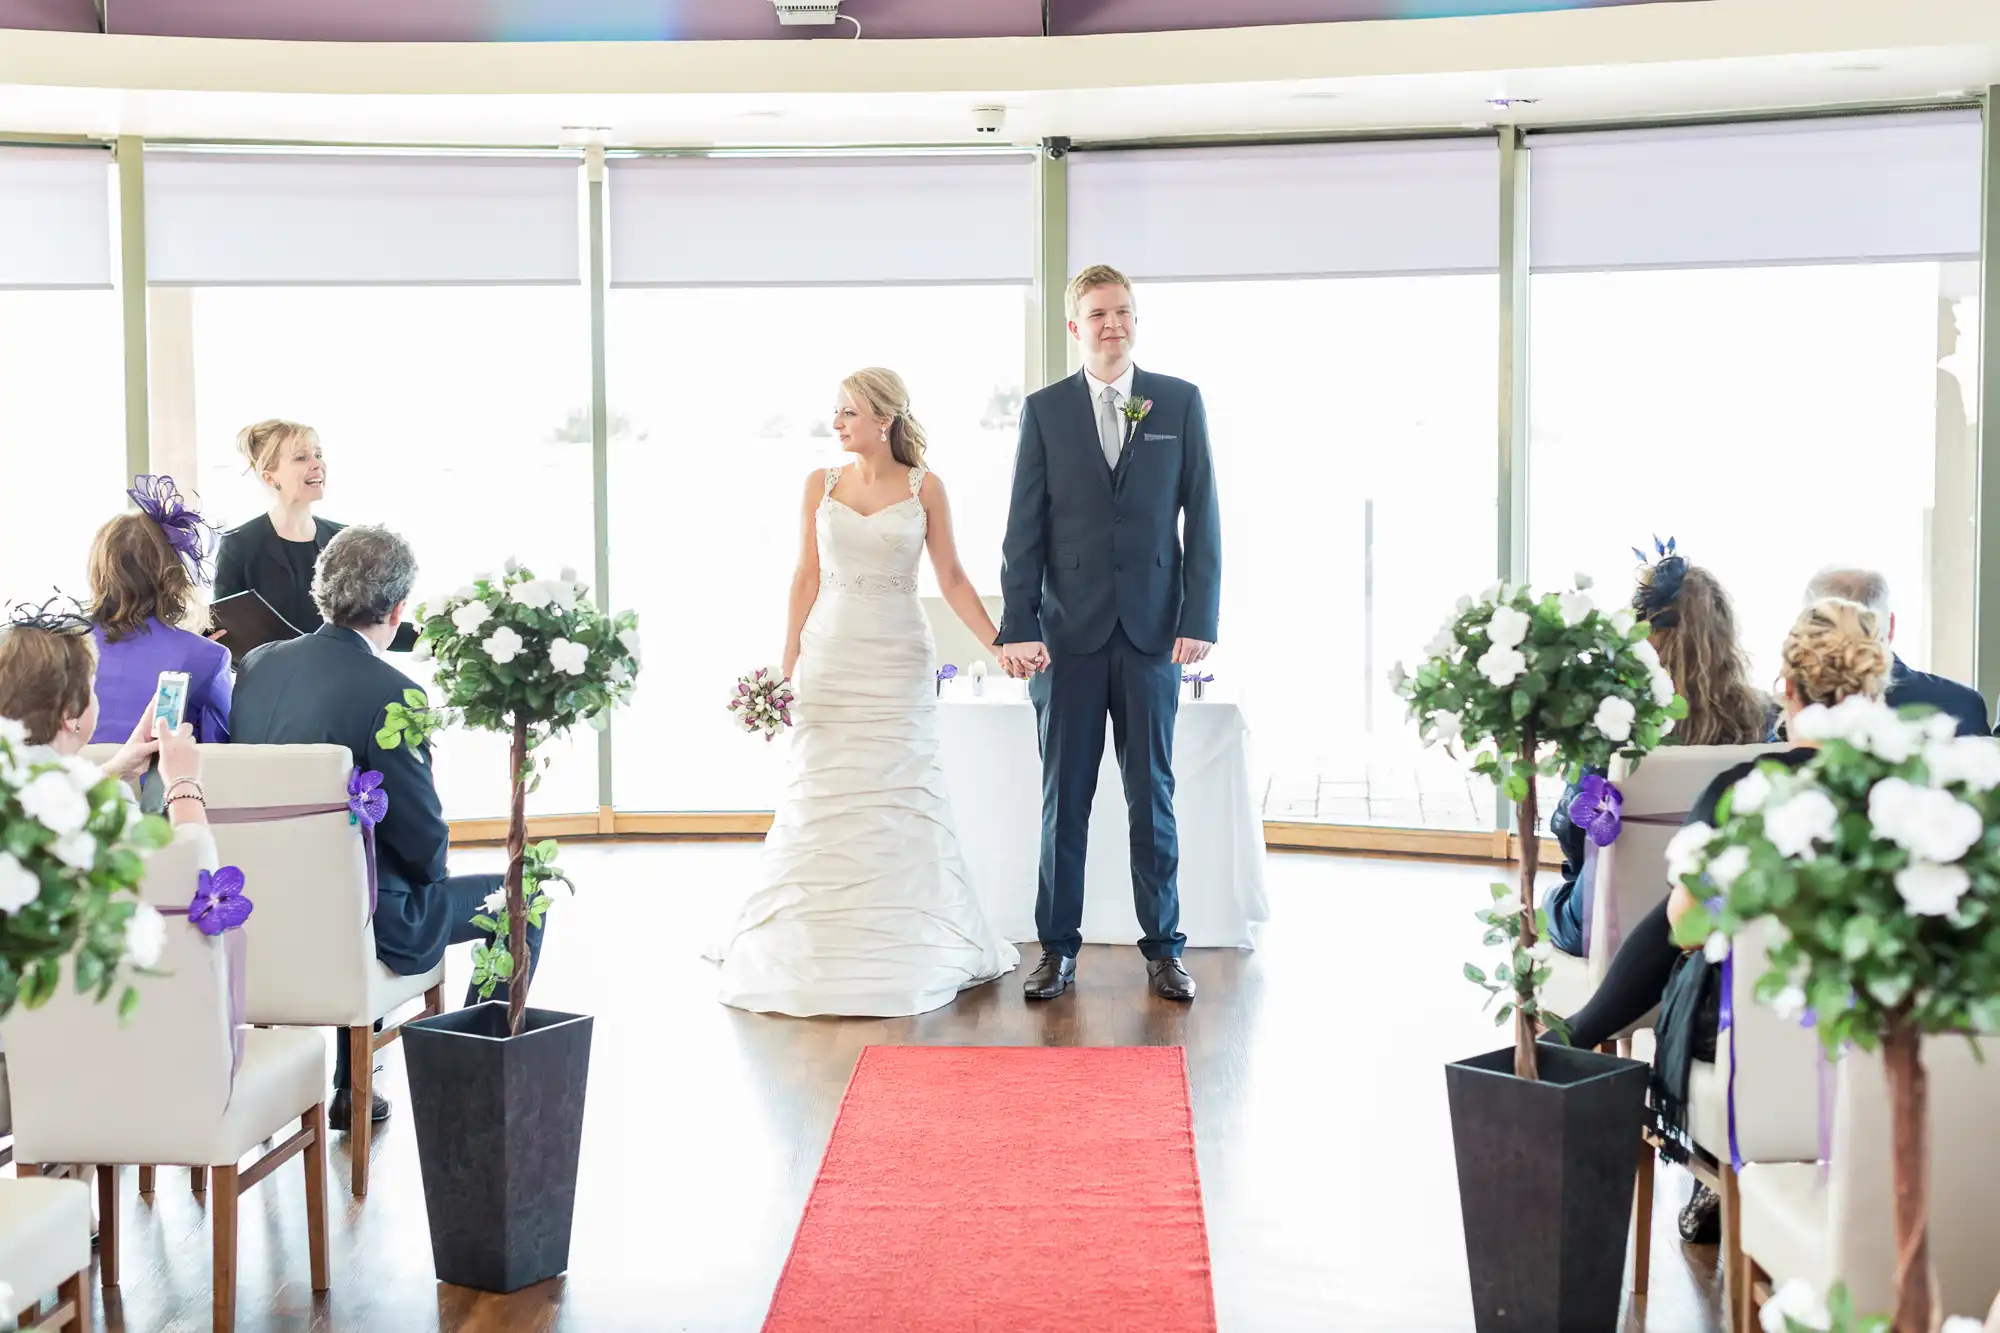 A bride and groom hold hands while walking down the aisle during their wedding ceremony, surrounded by seated guests in a venue with large windows.